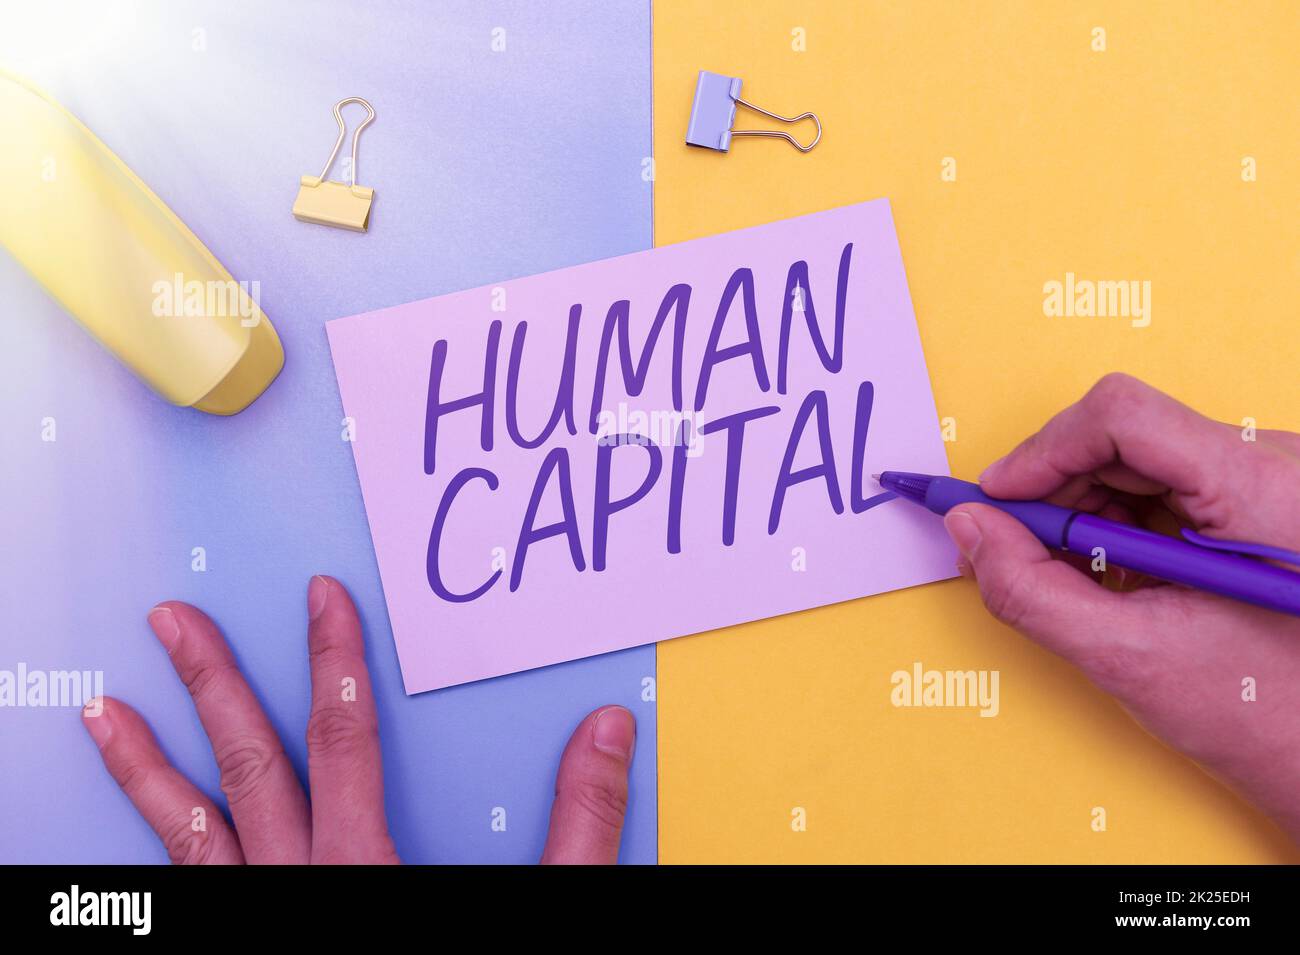 Conceptual caption Human Capital. Concept meaning Intangible Collective Resources Competence Capital Education Flashy School Office Supplies, Teaching Learning Collections, Writing Tools Stock Photo